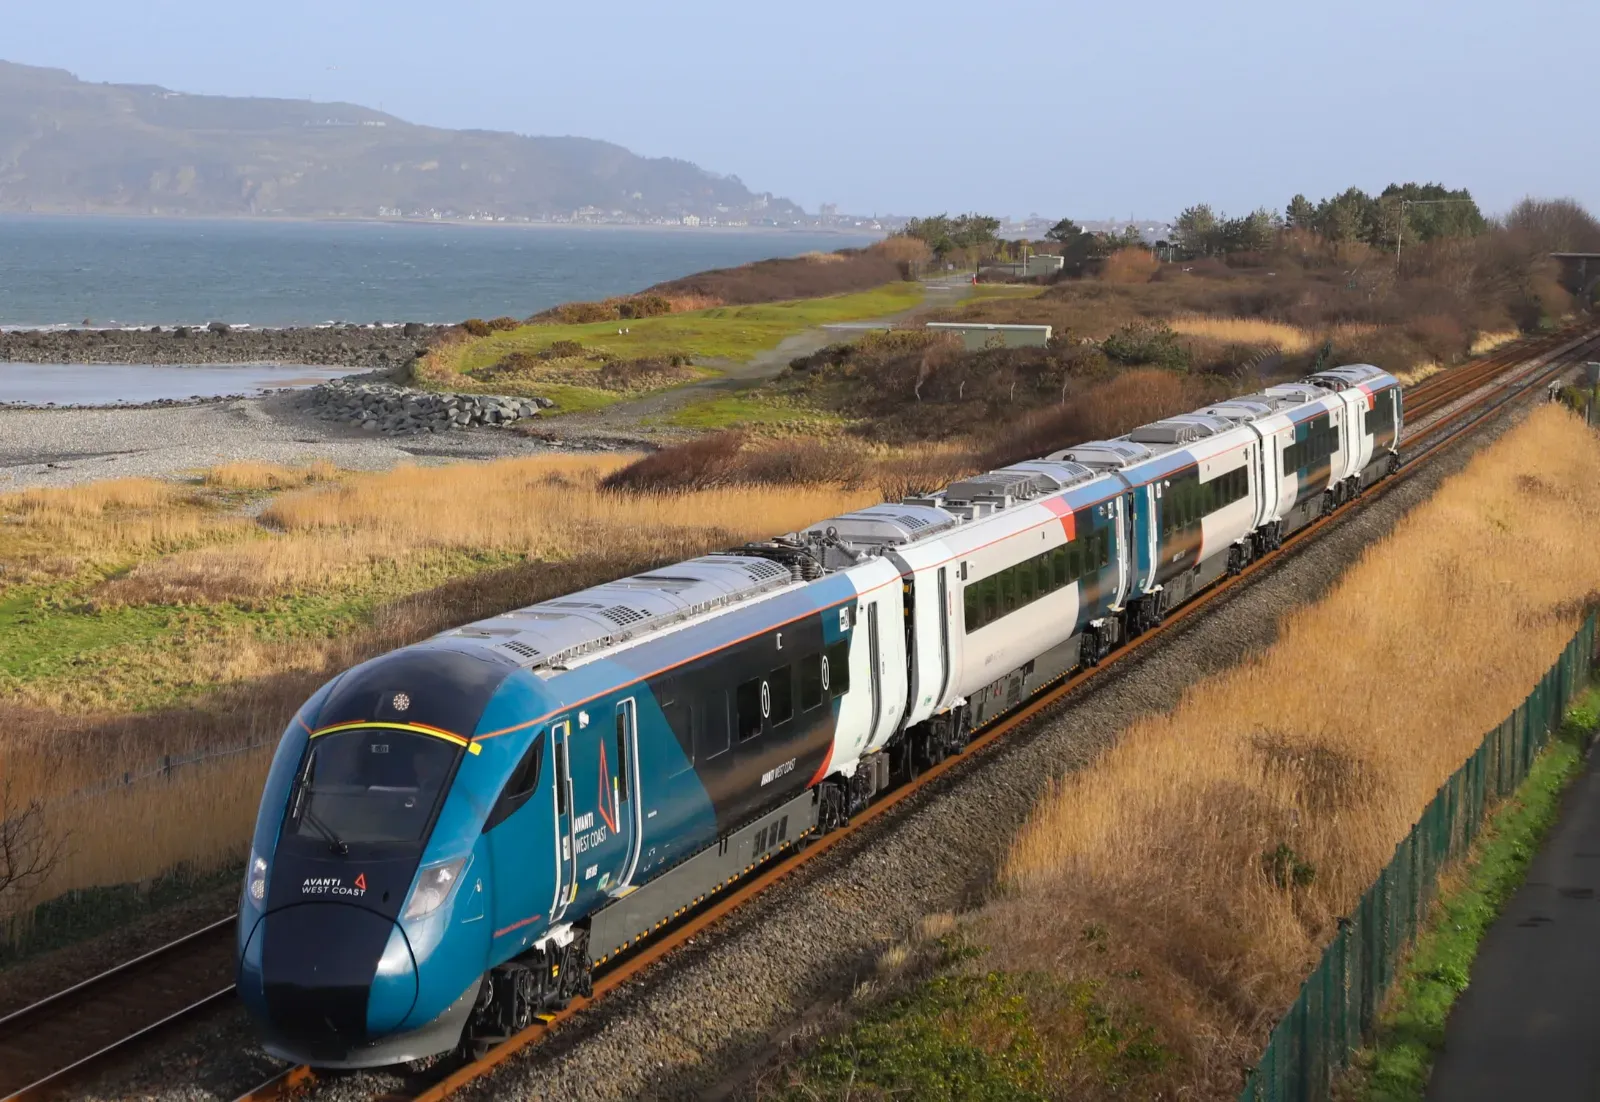 A class 805 Evero is travelling down a coastal railway track with its teal and white livery. In the near distance is a rocky shoreline. Beyond the stretch of water are distant hills under a clear, blue sky.